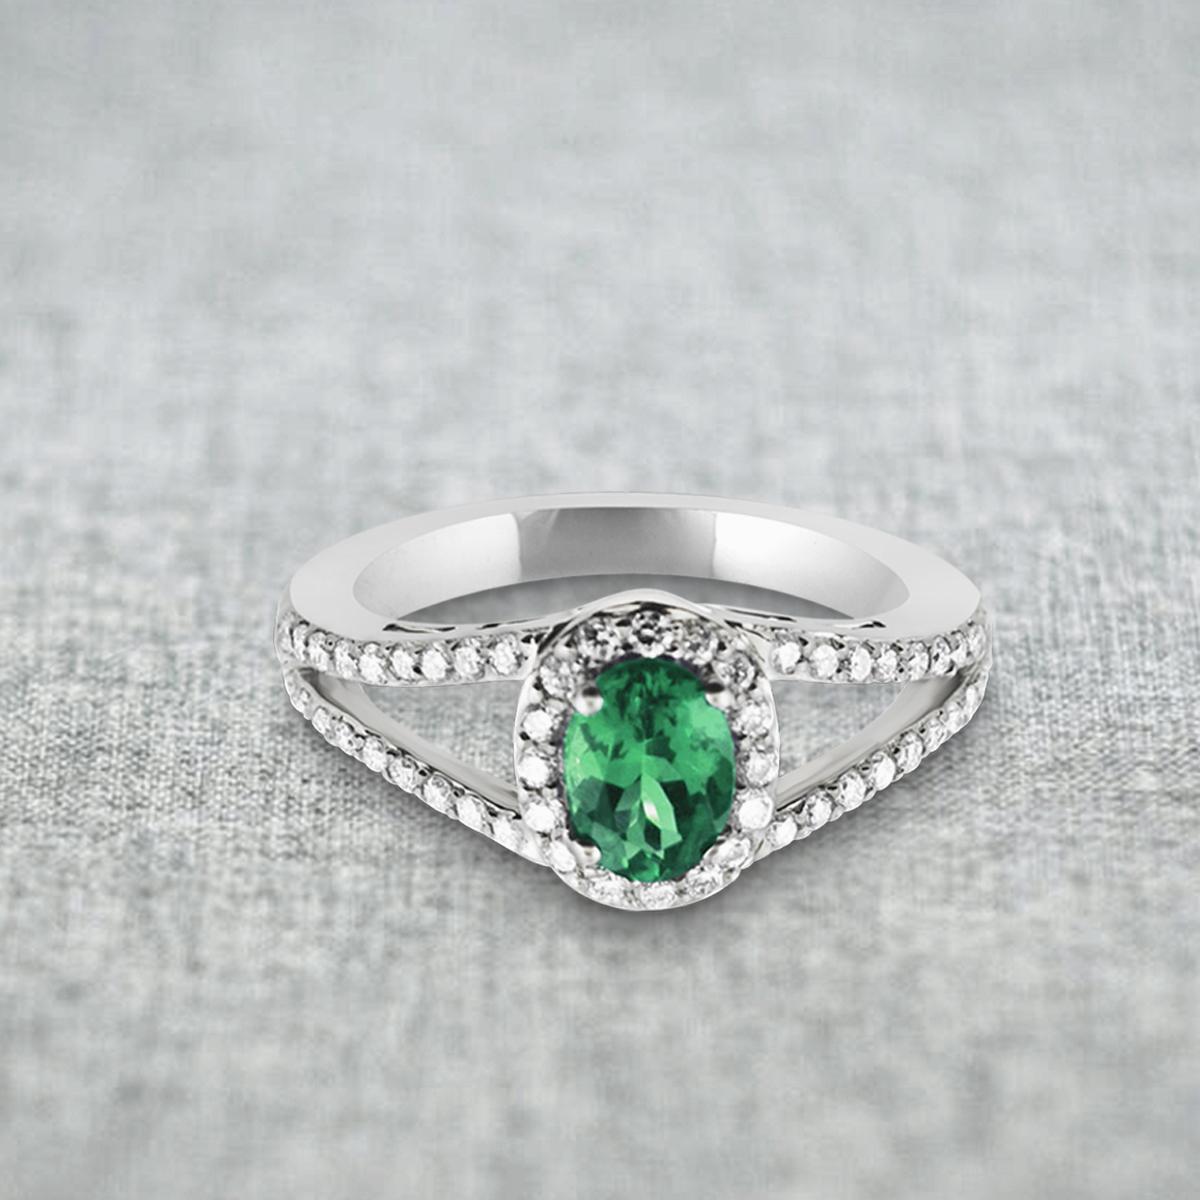 Oval Cut 18K White Gold 0.64cts Emerald and Diamond Ring, Style# R2192